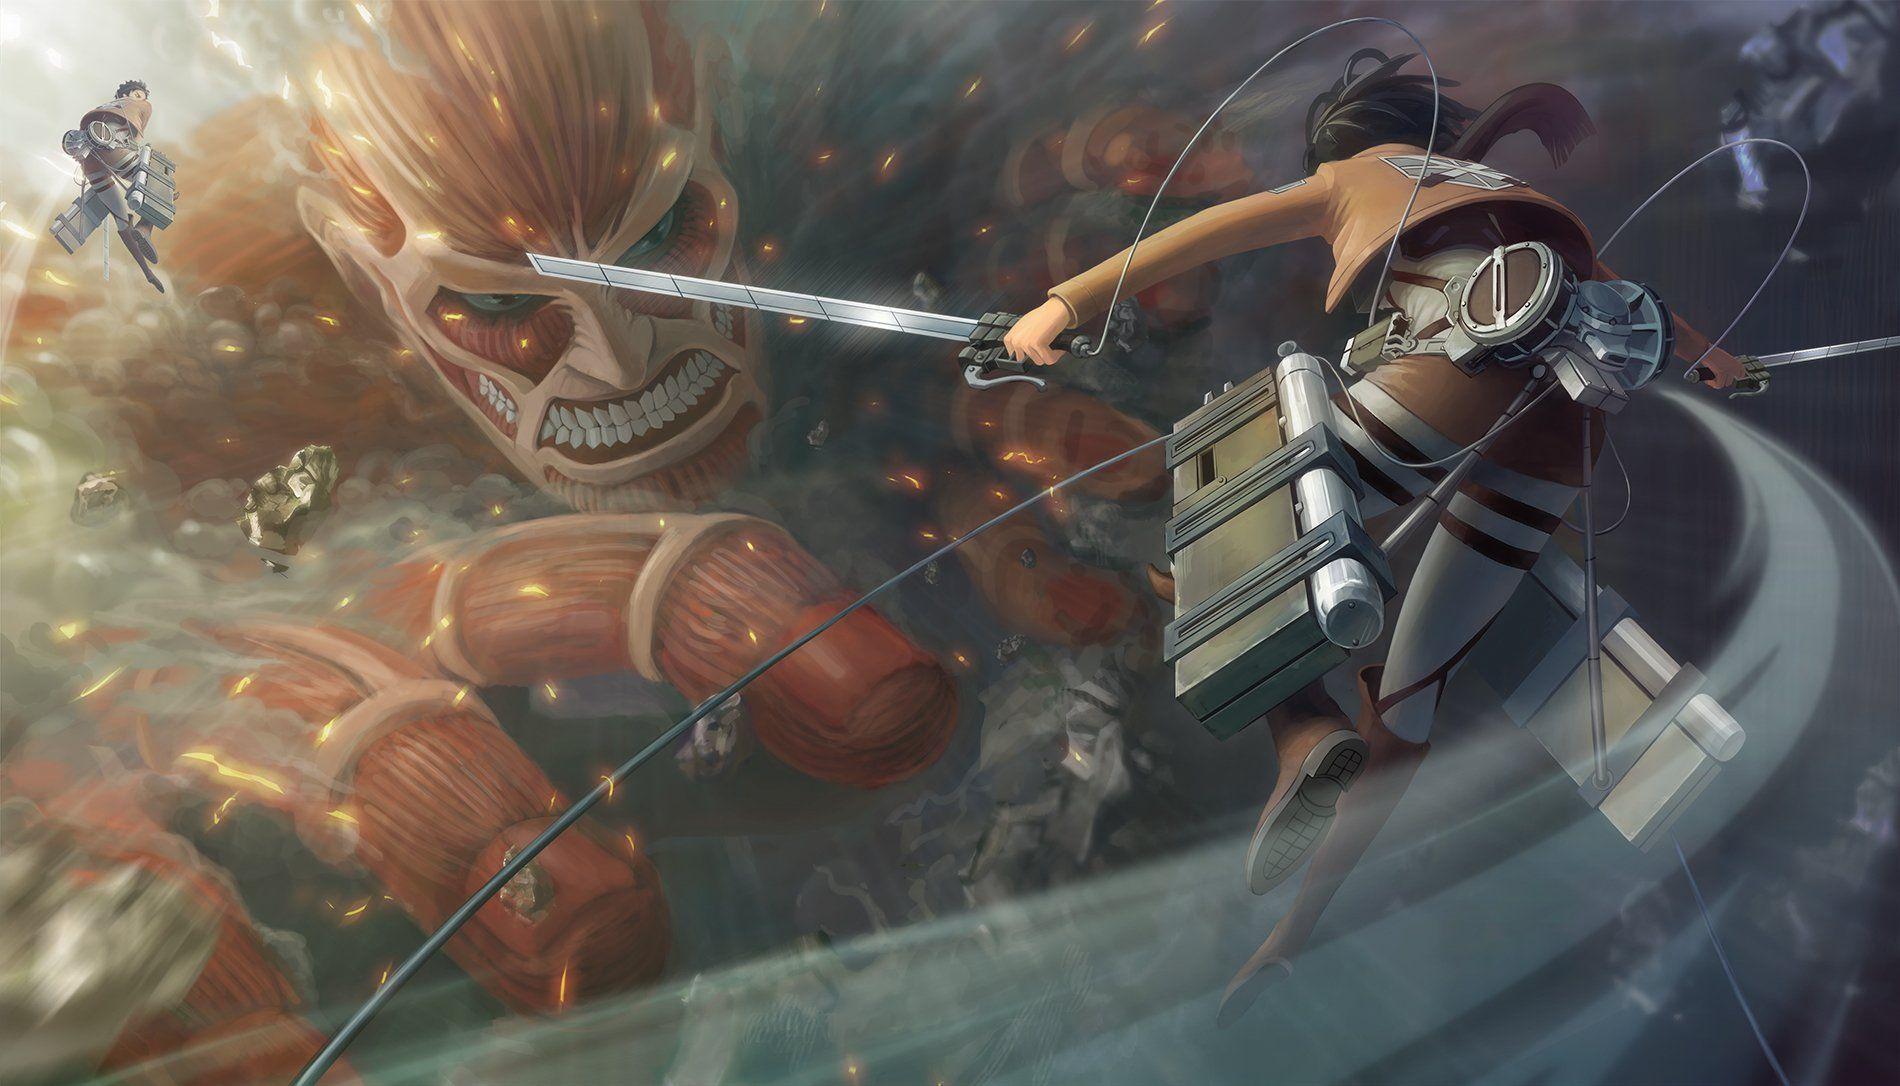 Featured image of post Aot S4 Wallpaper Desktop / Desktop wallpapers, hd backgrounds sort wallpapers by: